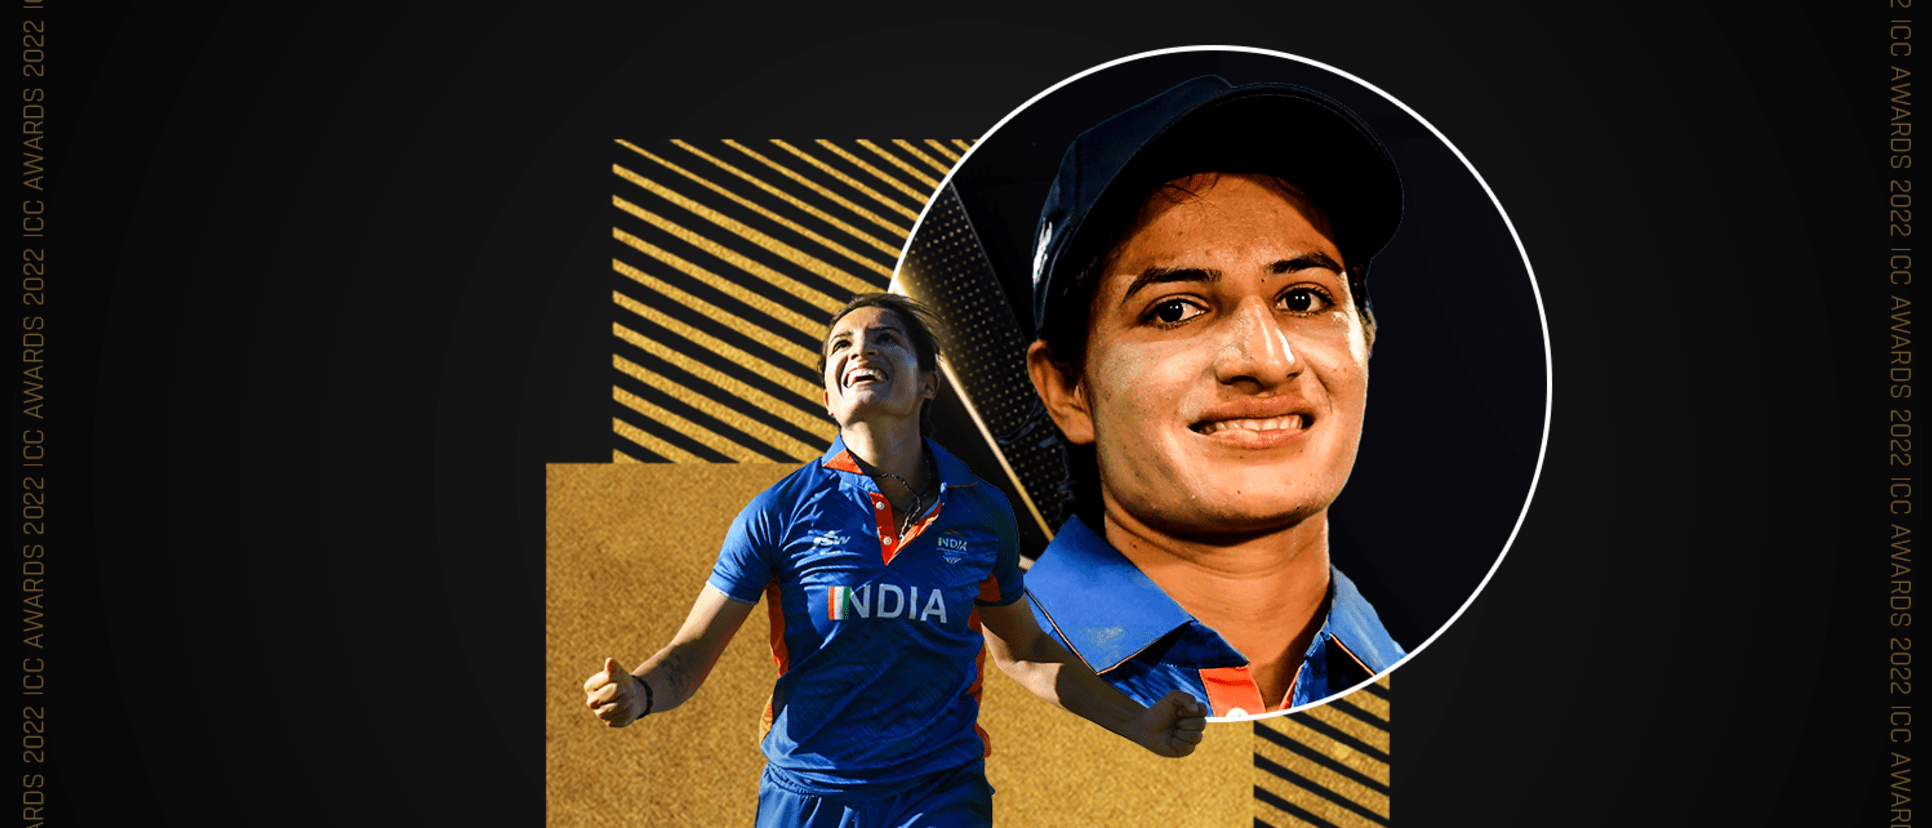 Renuka Singh is the winner of ICC Emerging Women's Cricketer of the Year 2022